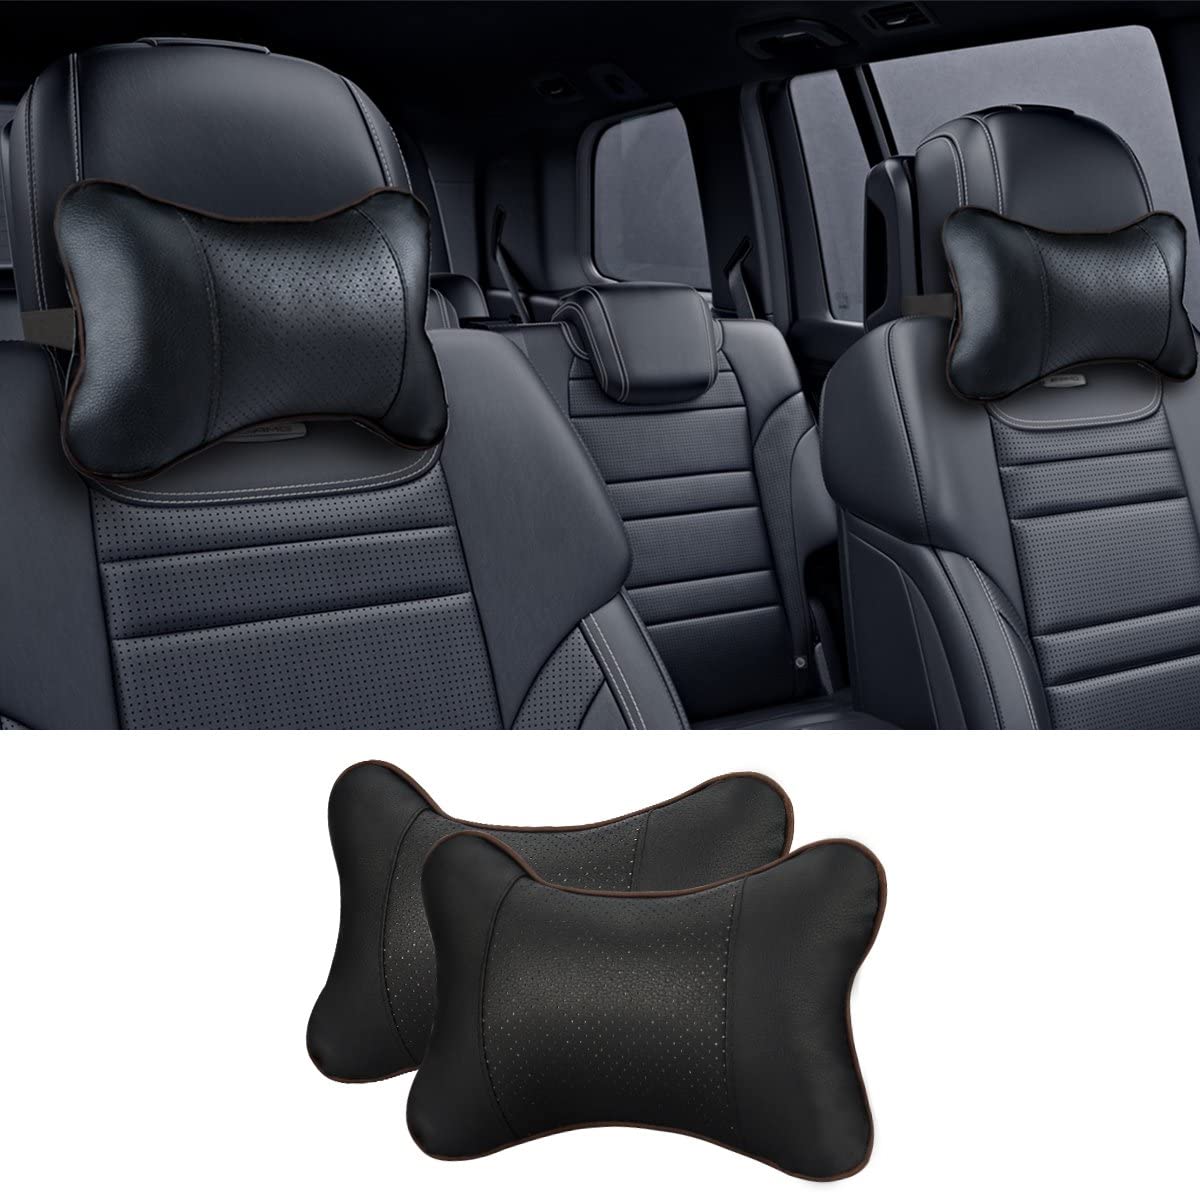 Buy GUSODOR Car Neck Pillow Breathable Auto Head Neck Rest Cushion Relax Neck  Support Headrest Comfortable Soft Pillows for Travel Car Seat & Home, Set  of 2[Black] Online in Hong Kong. B06XRTGD2G